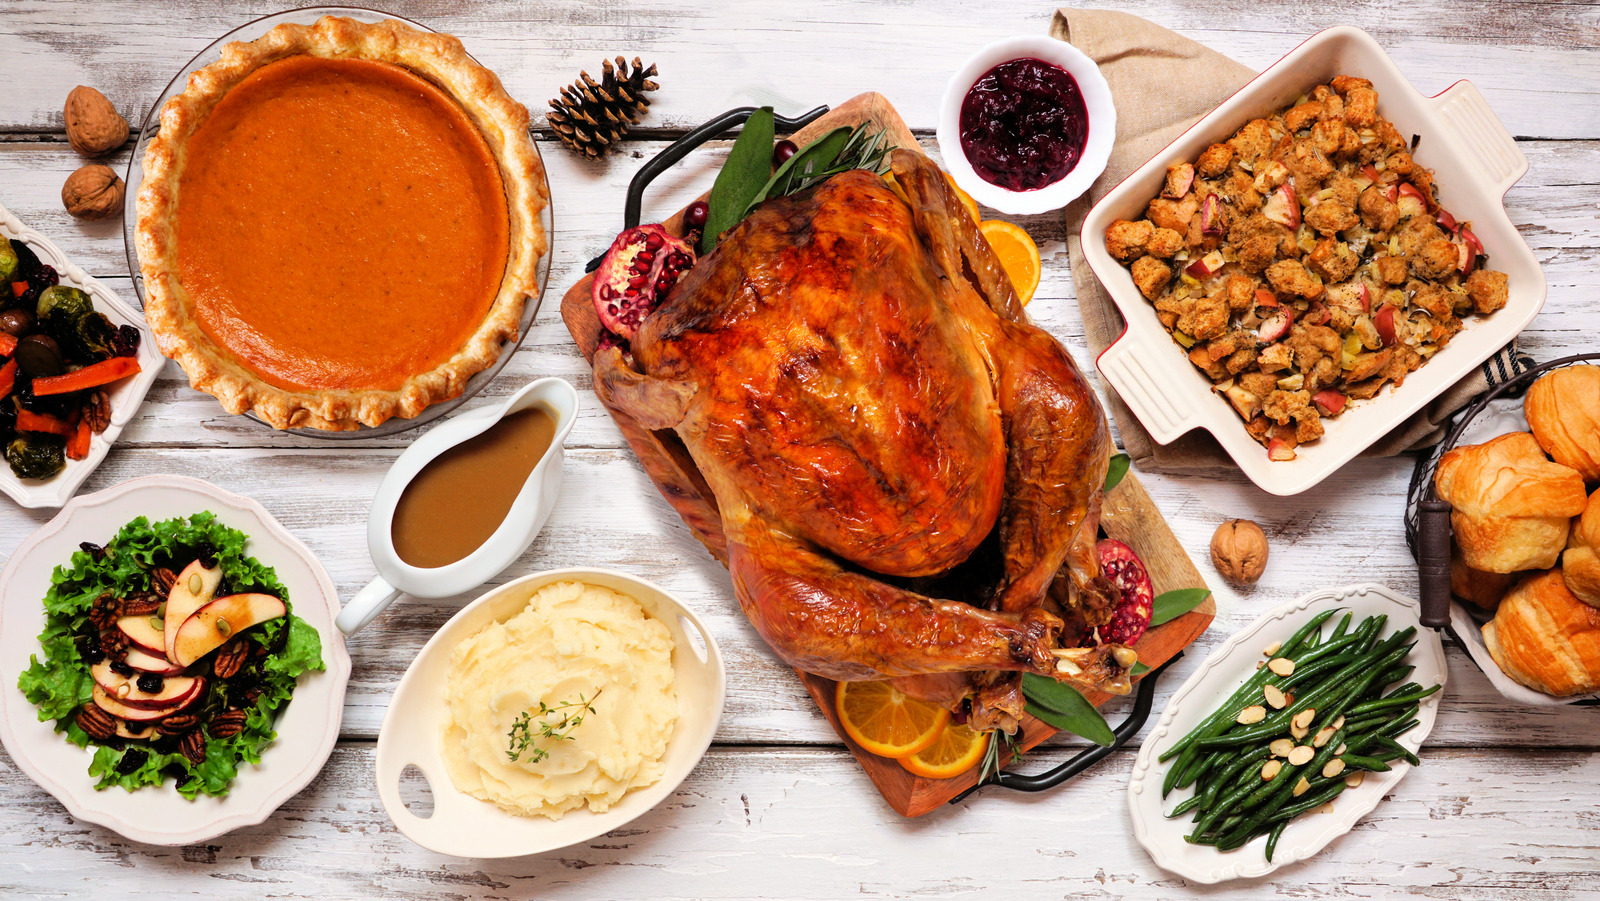 25 Best Places To Buy Your Pre-Cooked Thanksgiving Dinner